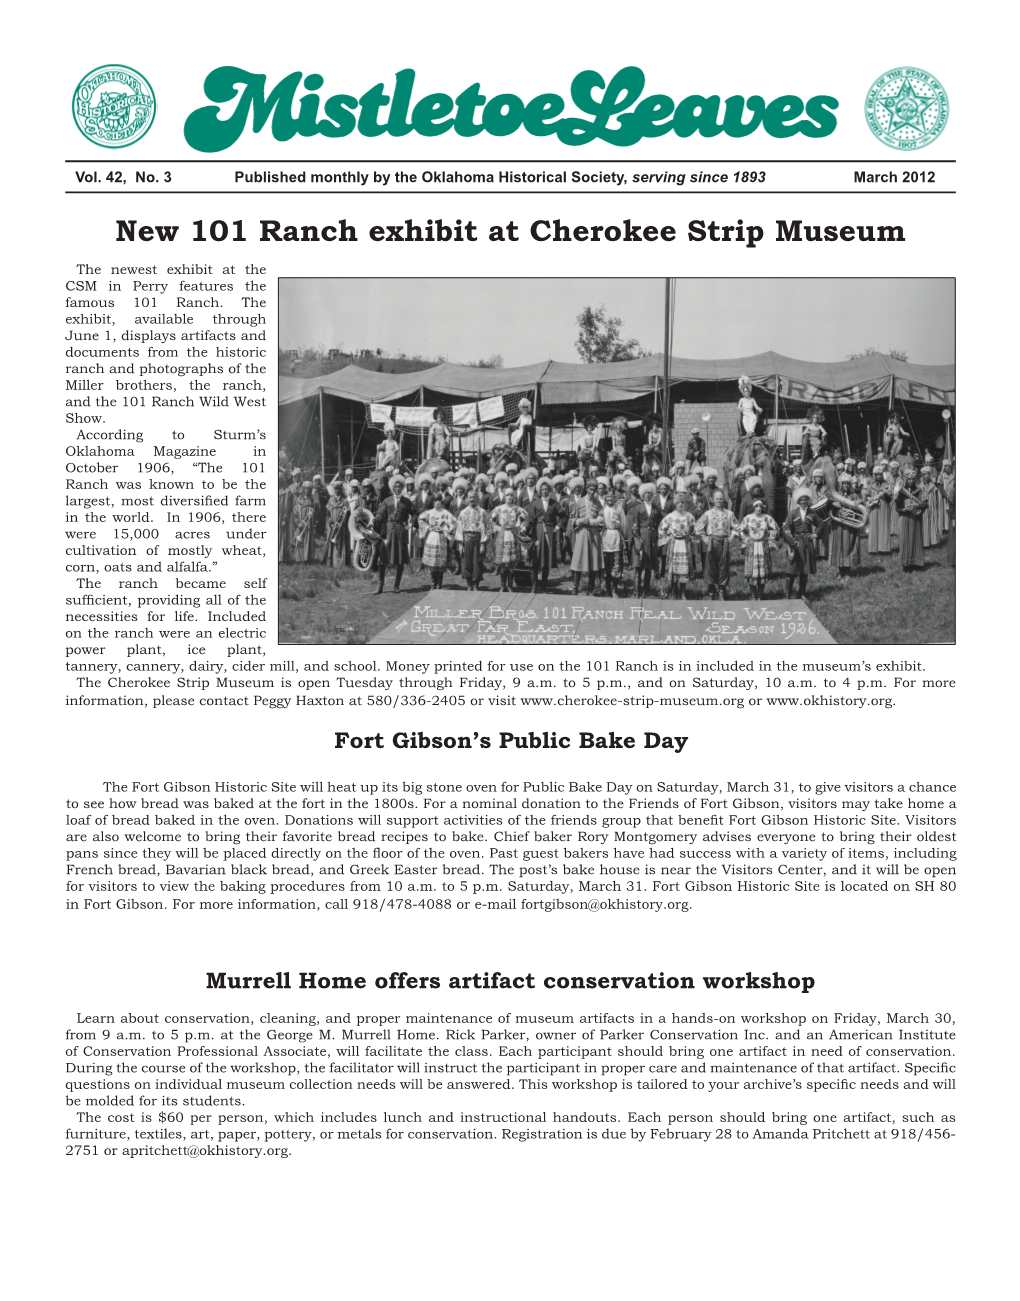 New 101 Ranch Exhibit at Cherokee Strip Museum the Newest Exhibit at the CSM in Perry Features the Famous 101 Ranch